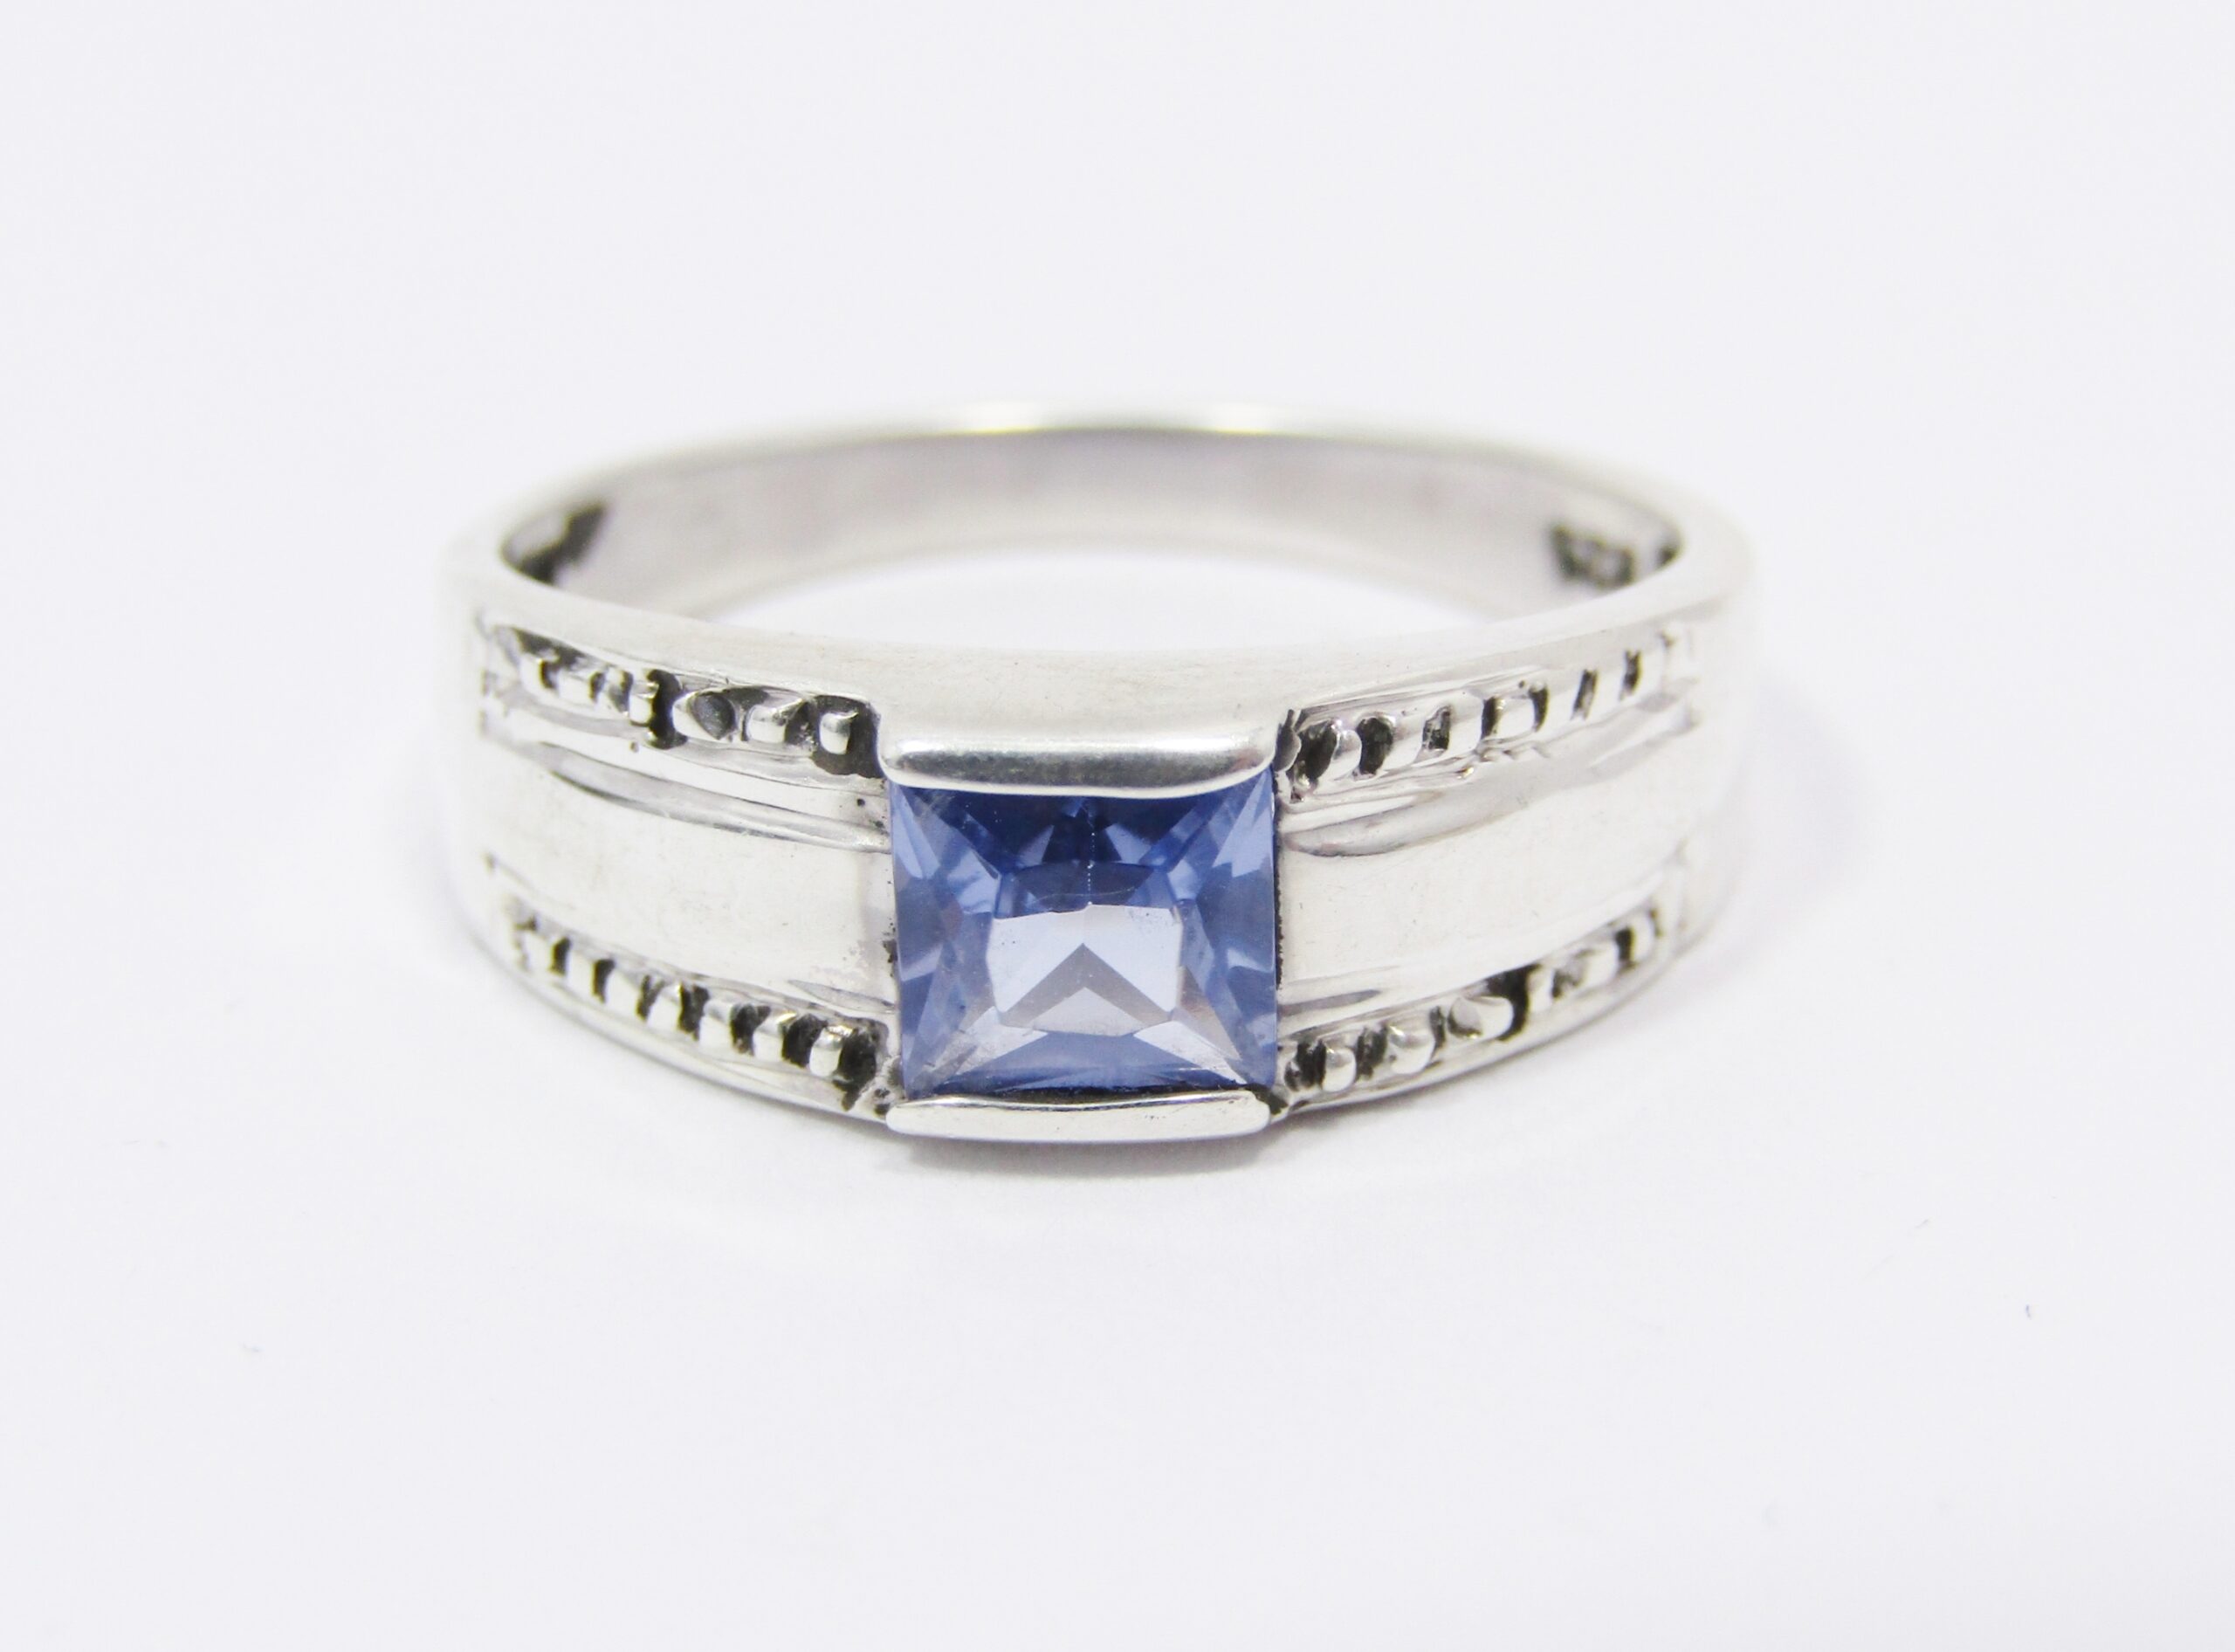 A Very Pretty Dainty Blue Zirconia Ring in Sterling Silver.